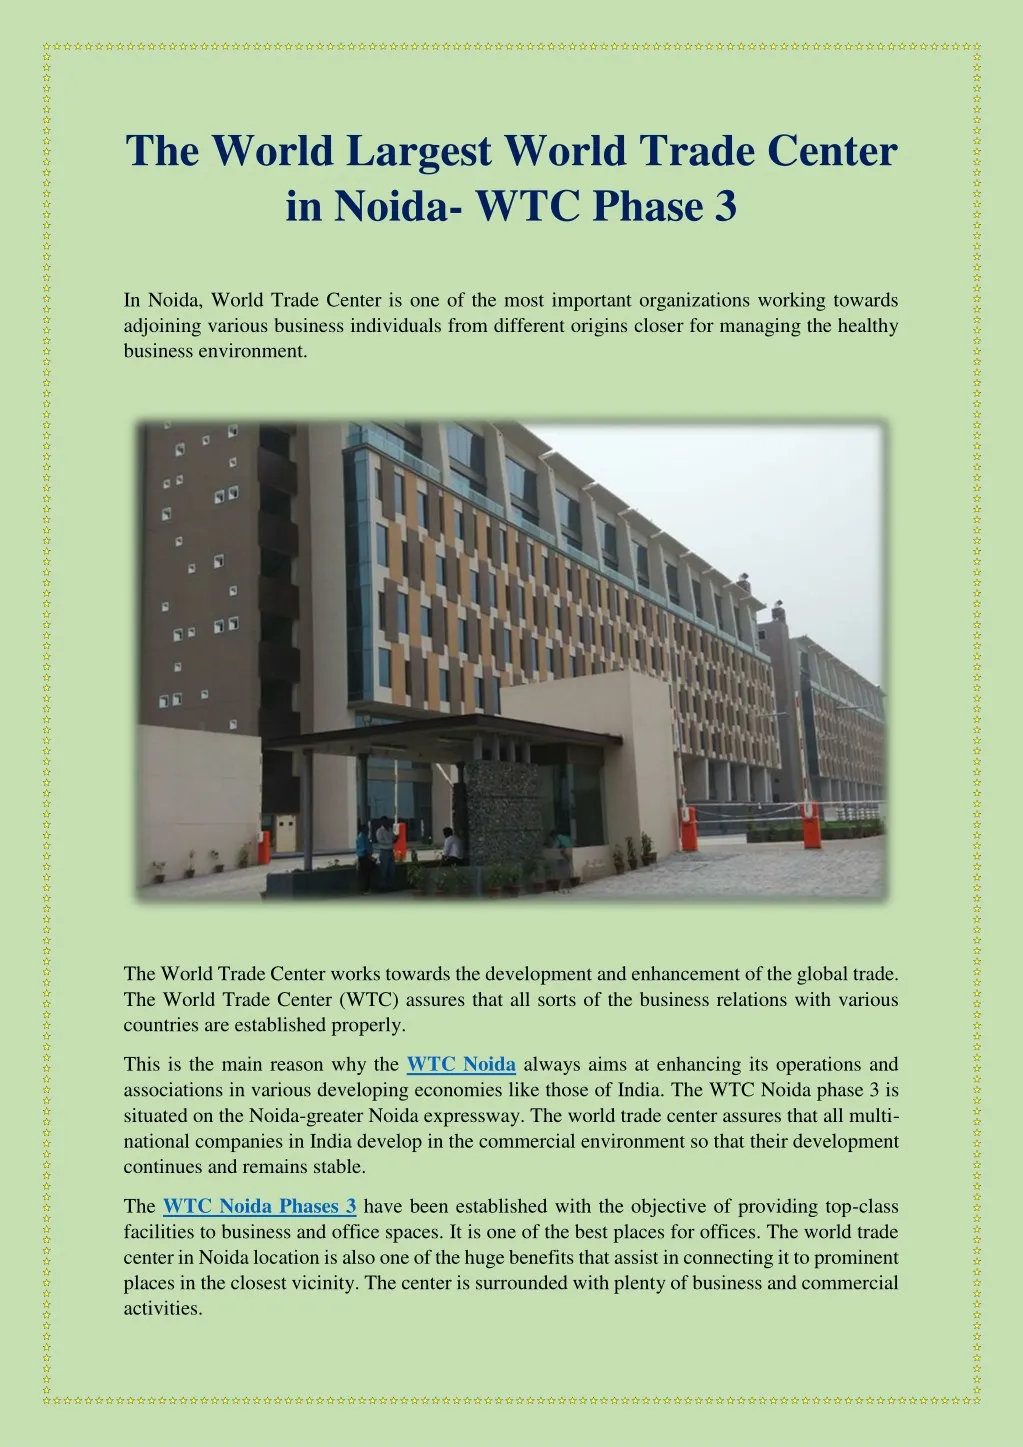 the world largest world trade center in noida